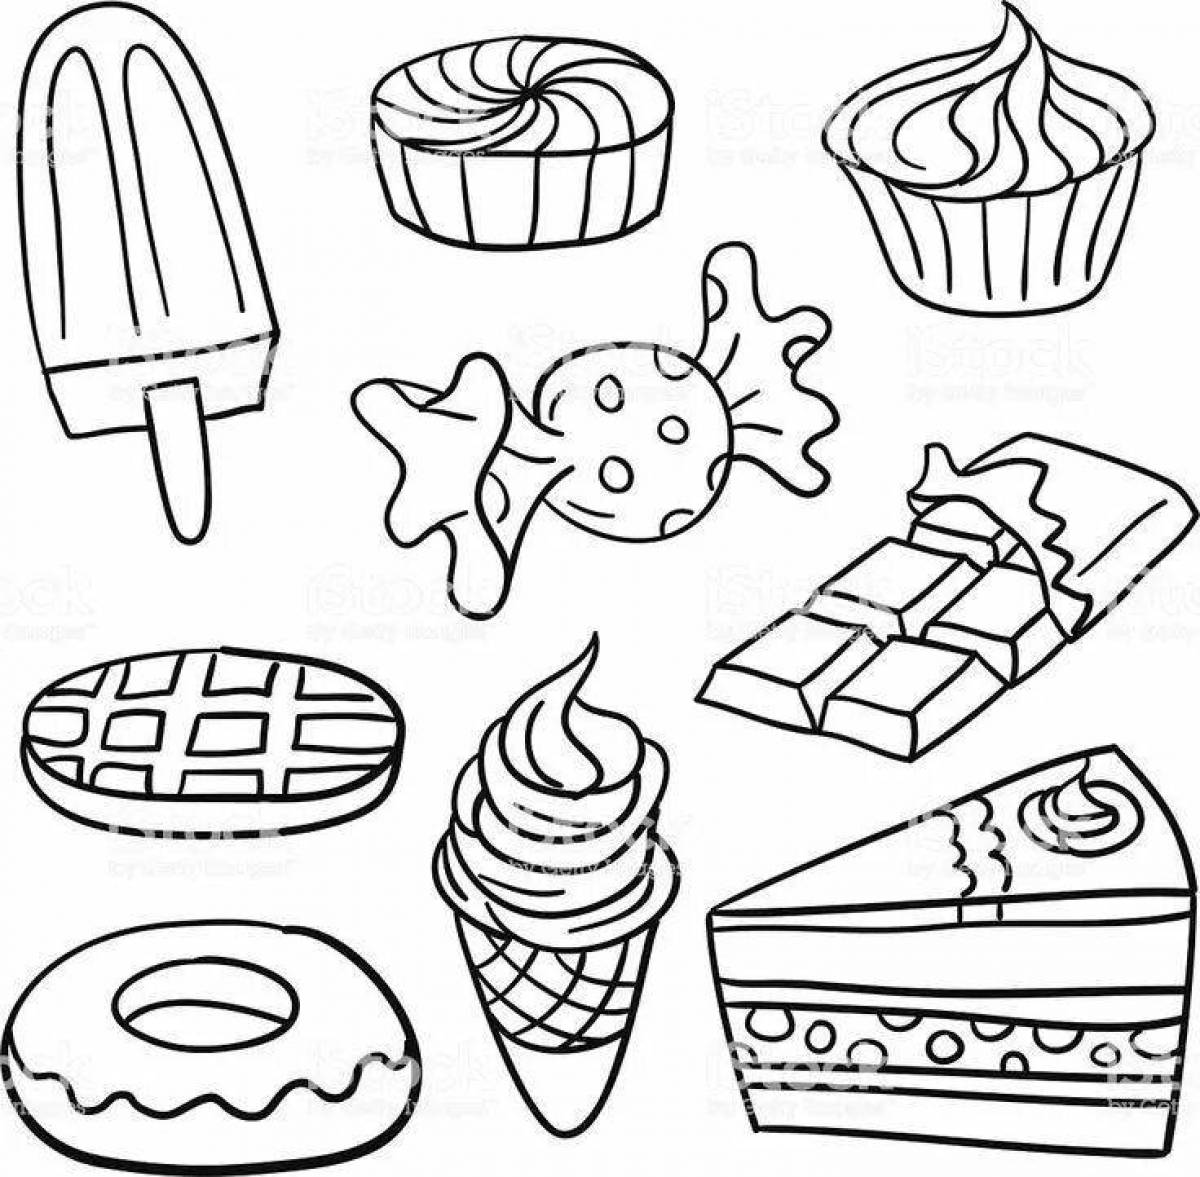 Fabulous confectionery coloring pages for kids